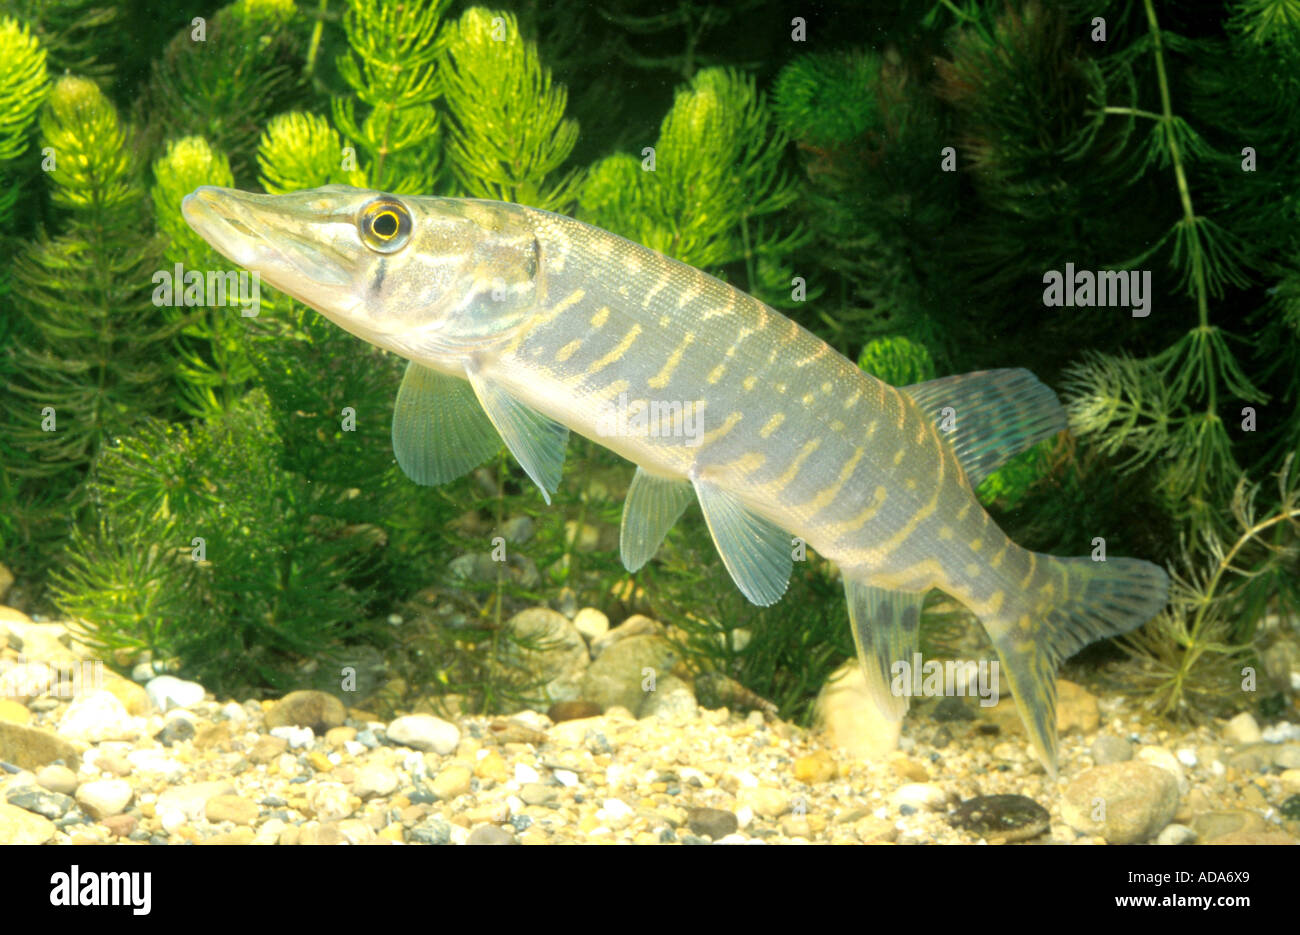 pike, northern pike (Esox lucius), underwater in front of water plant, Germany, Bavaria Stock Photo